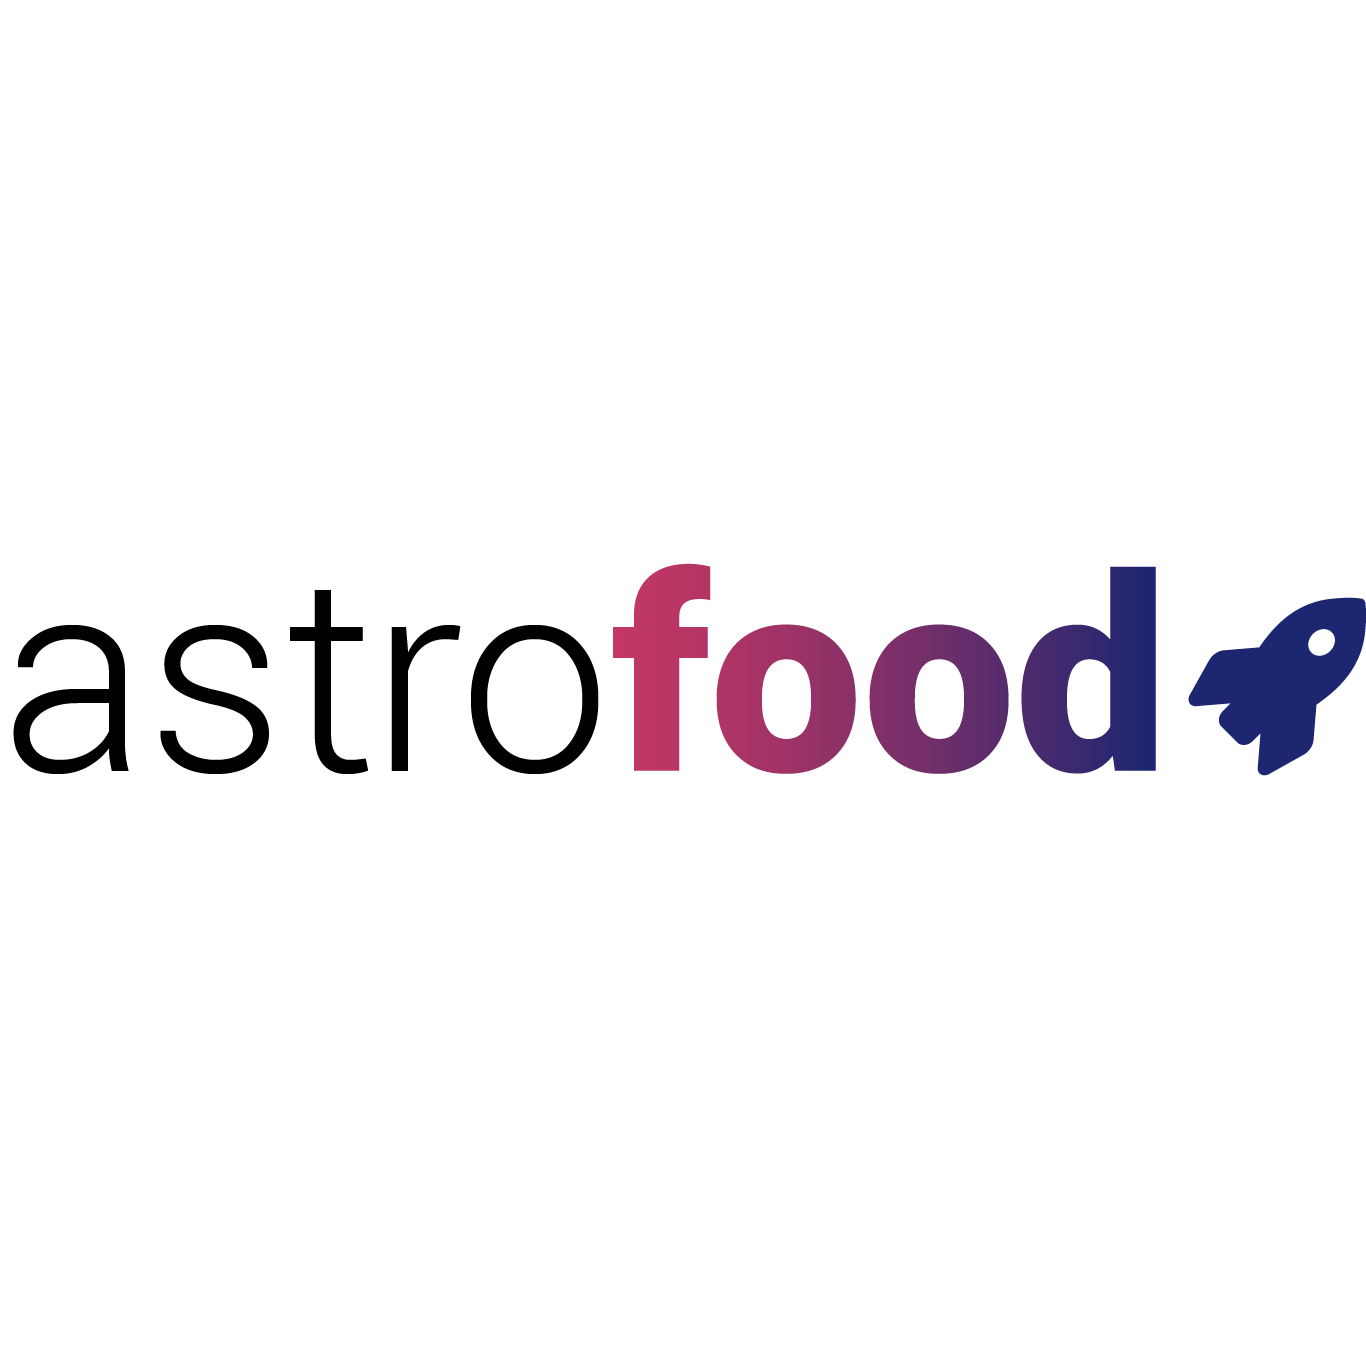 Astrofood pioneers nutrient-rich products with fresh Spirulina, targeting dietary gaps and space food tech.